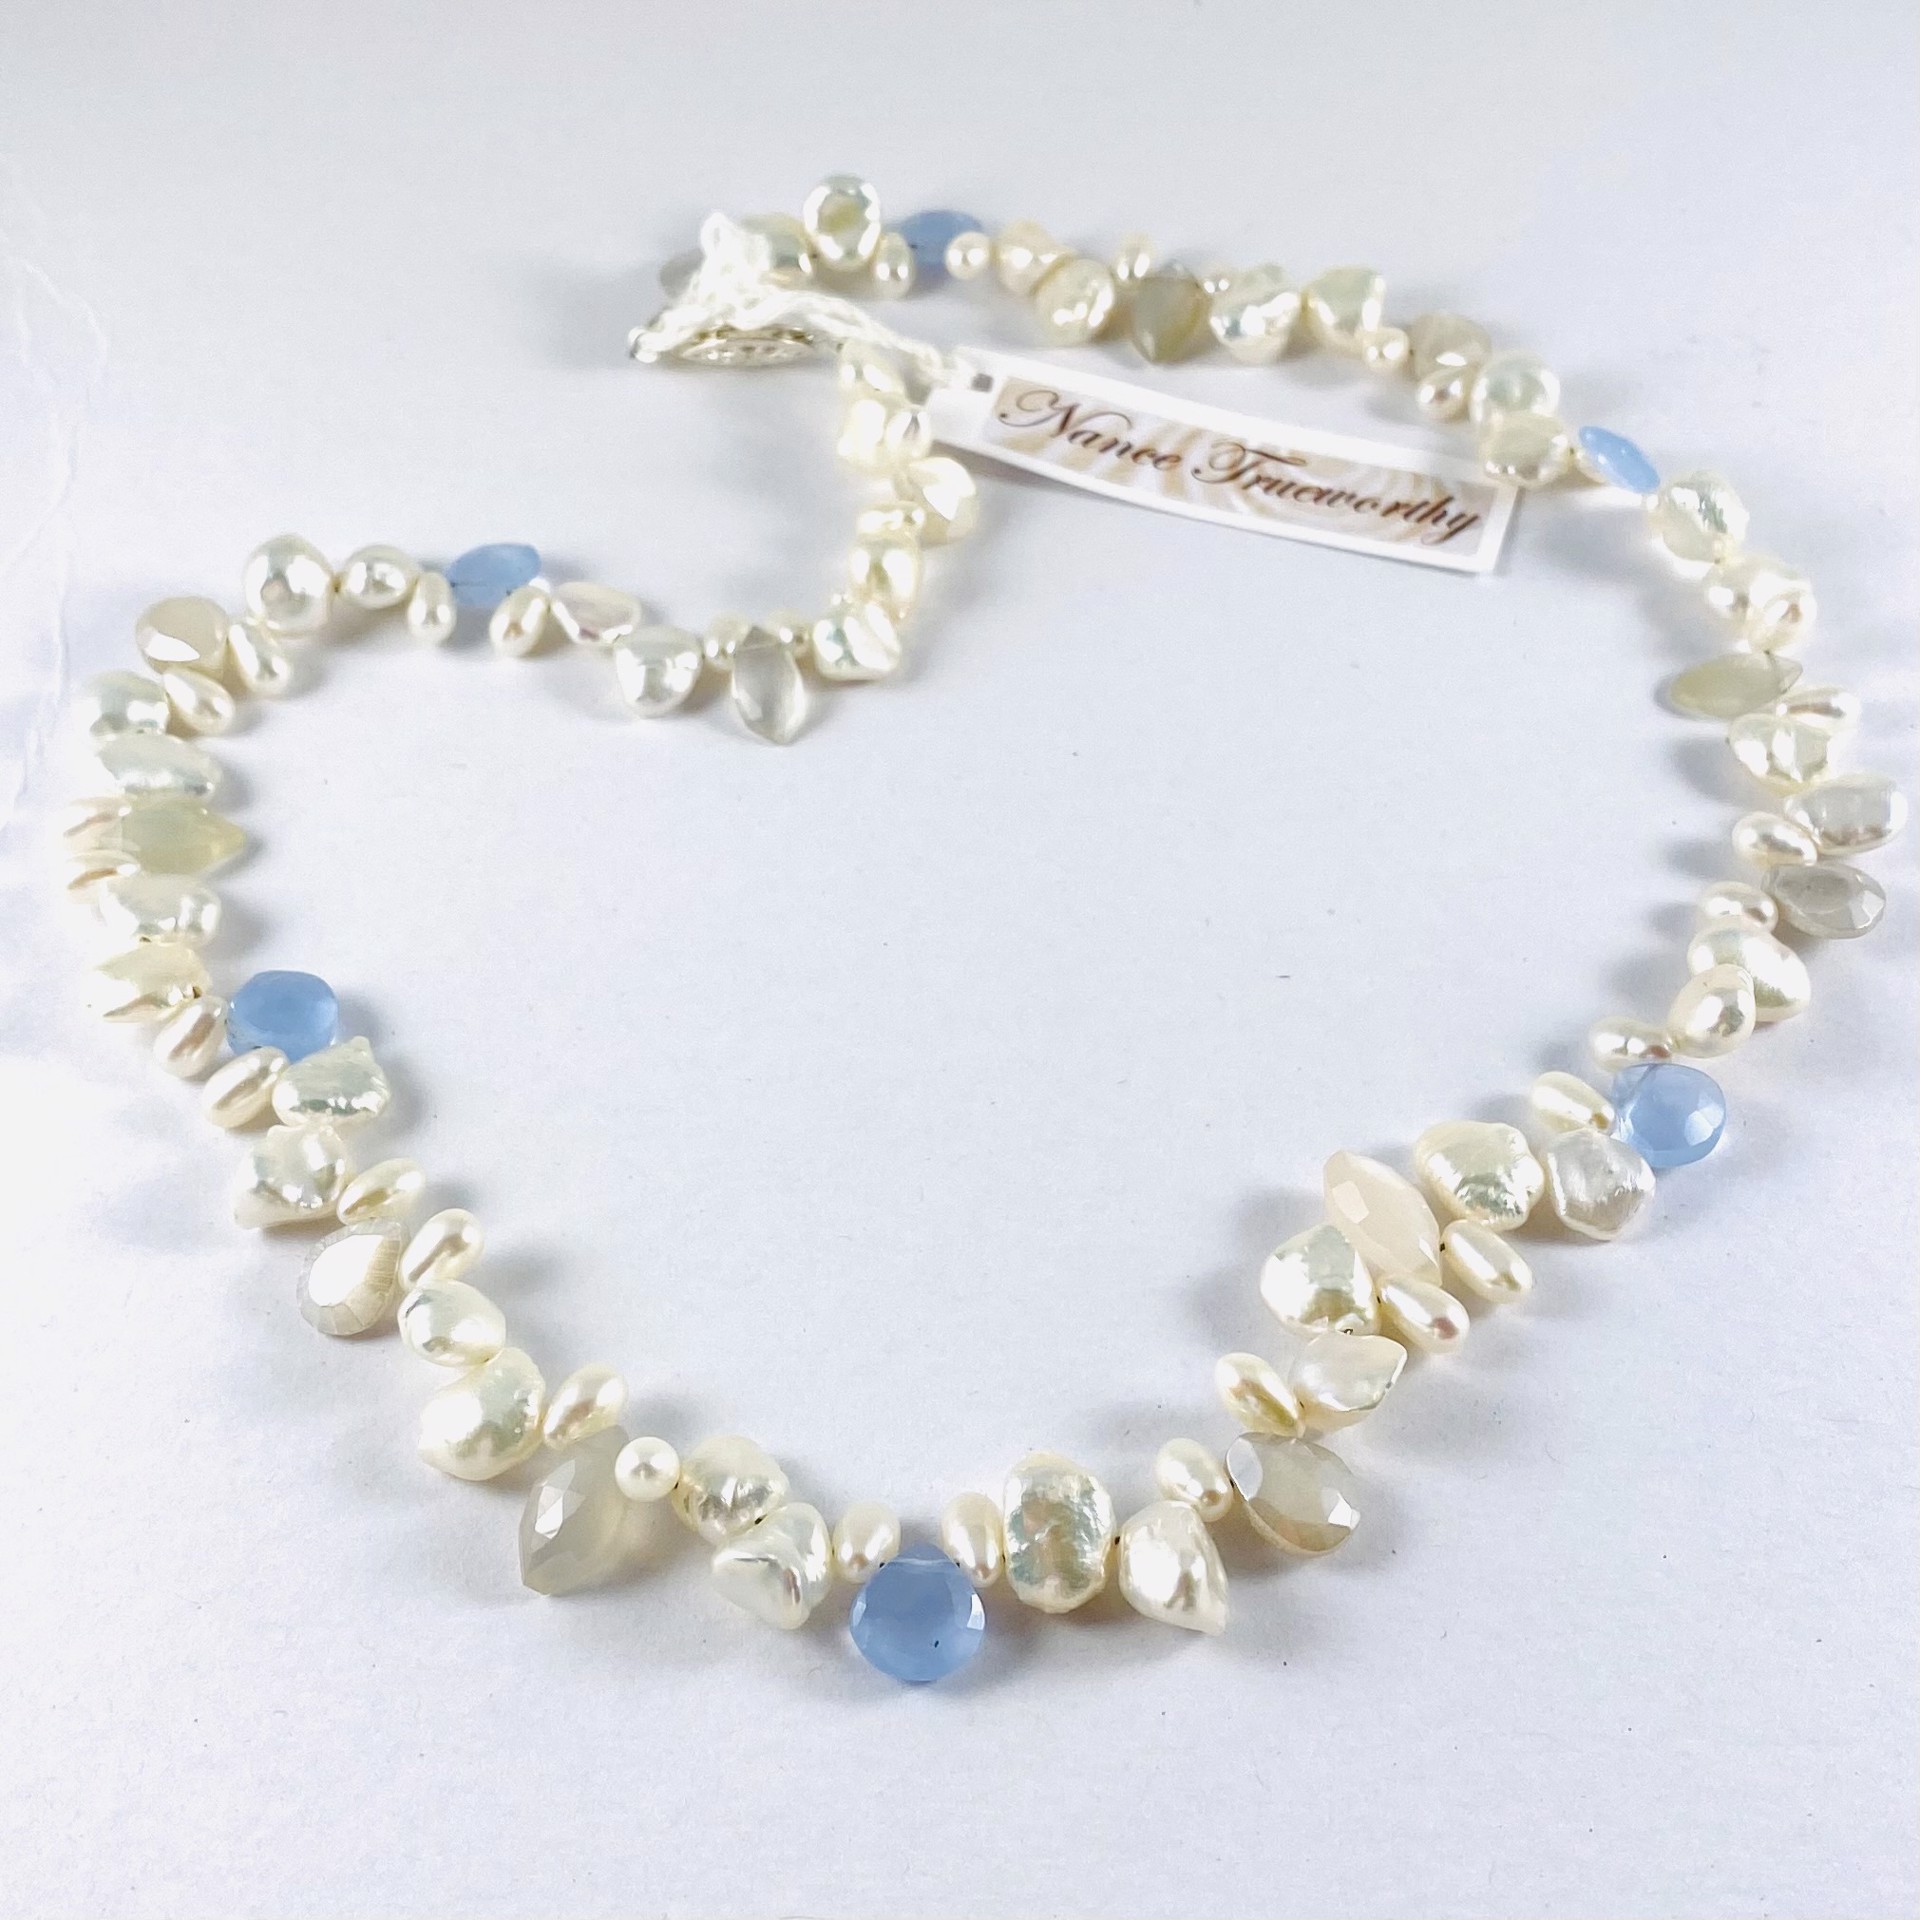 PN5-"Signature" Necklace of Keshi Pearls with Blue Chalcedony, coated Moonstone by Nance Trueworthy